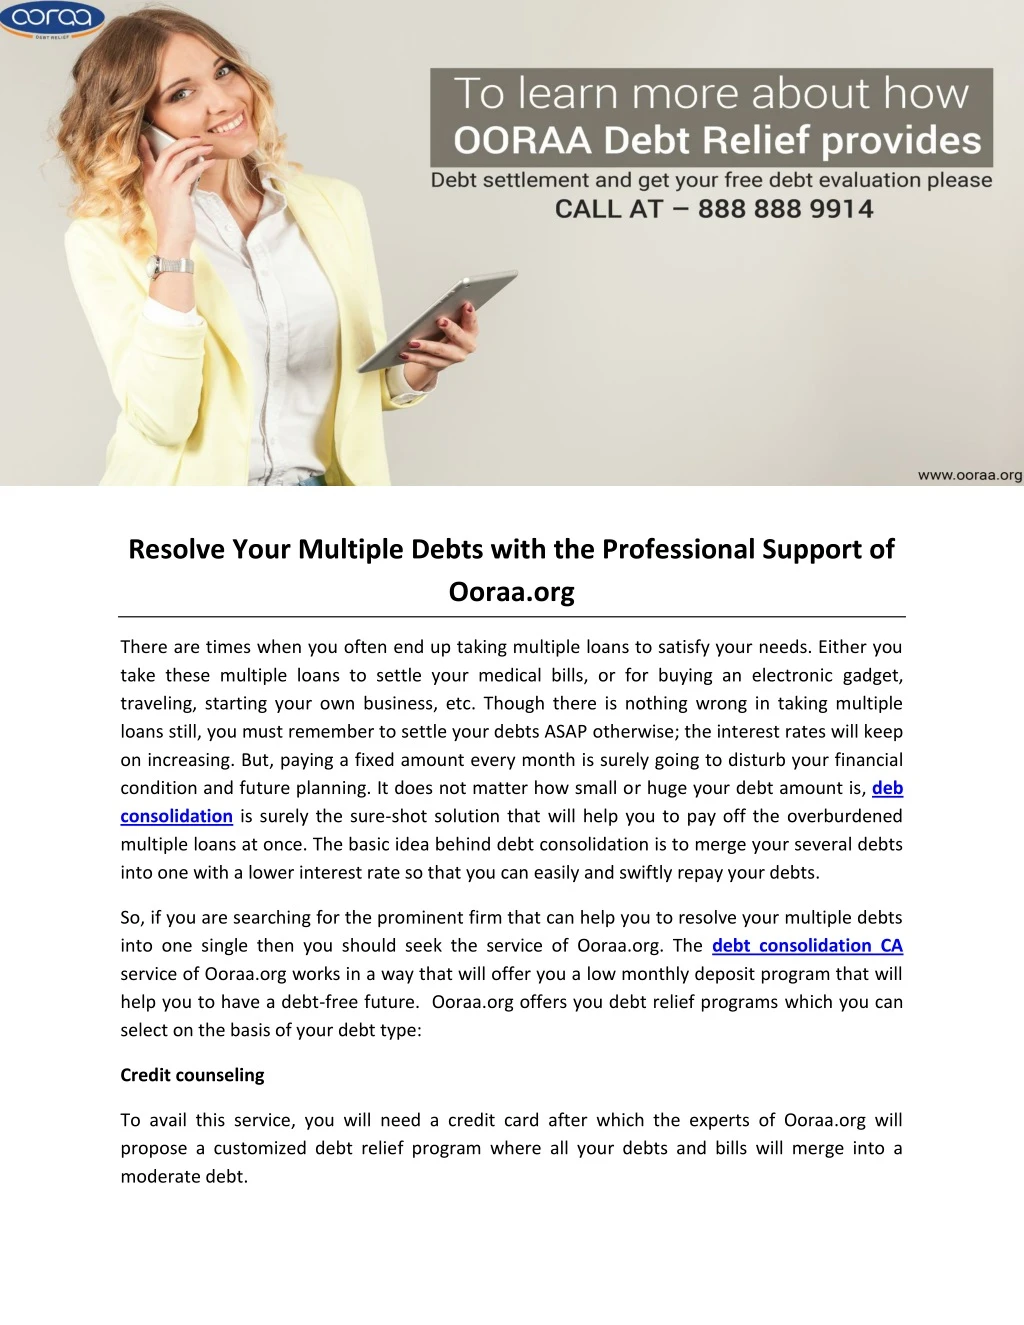 resolve your multiple debts with the professional